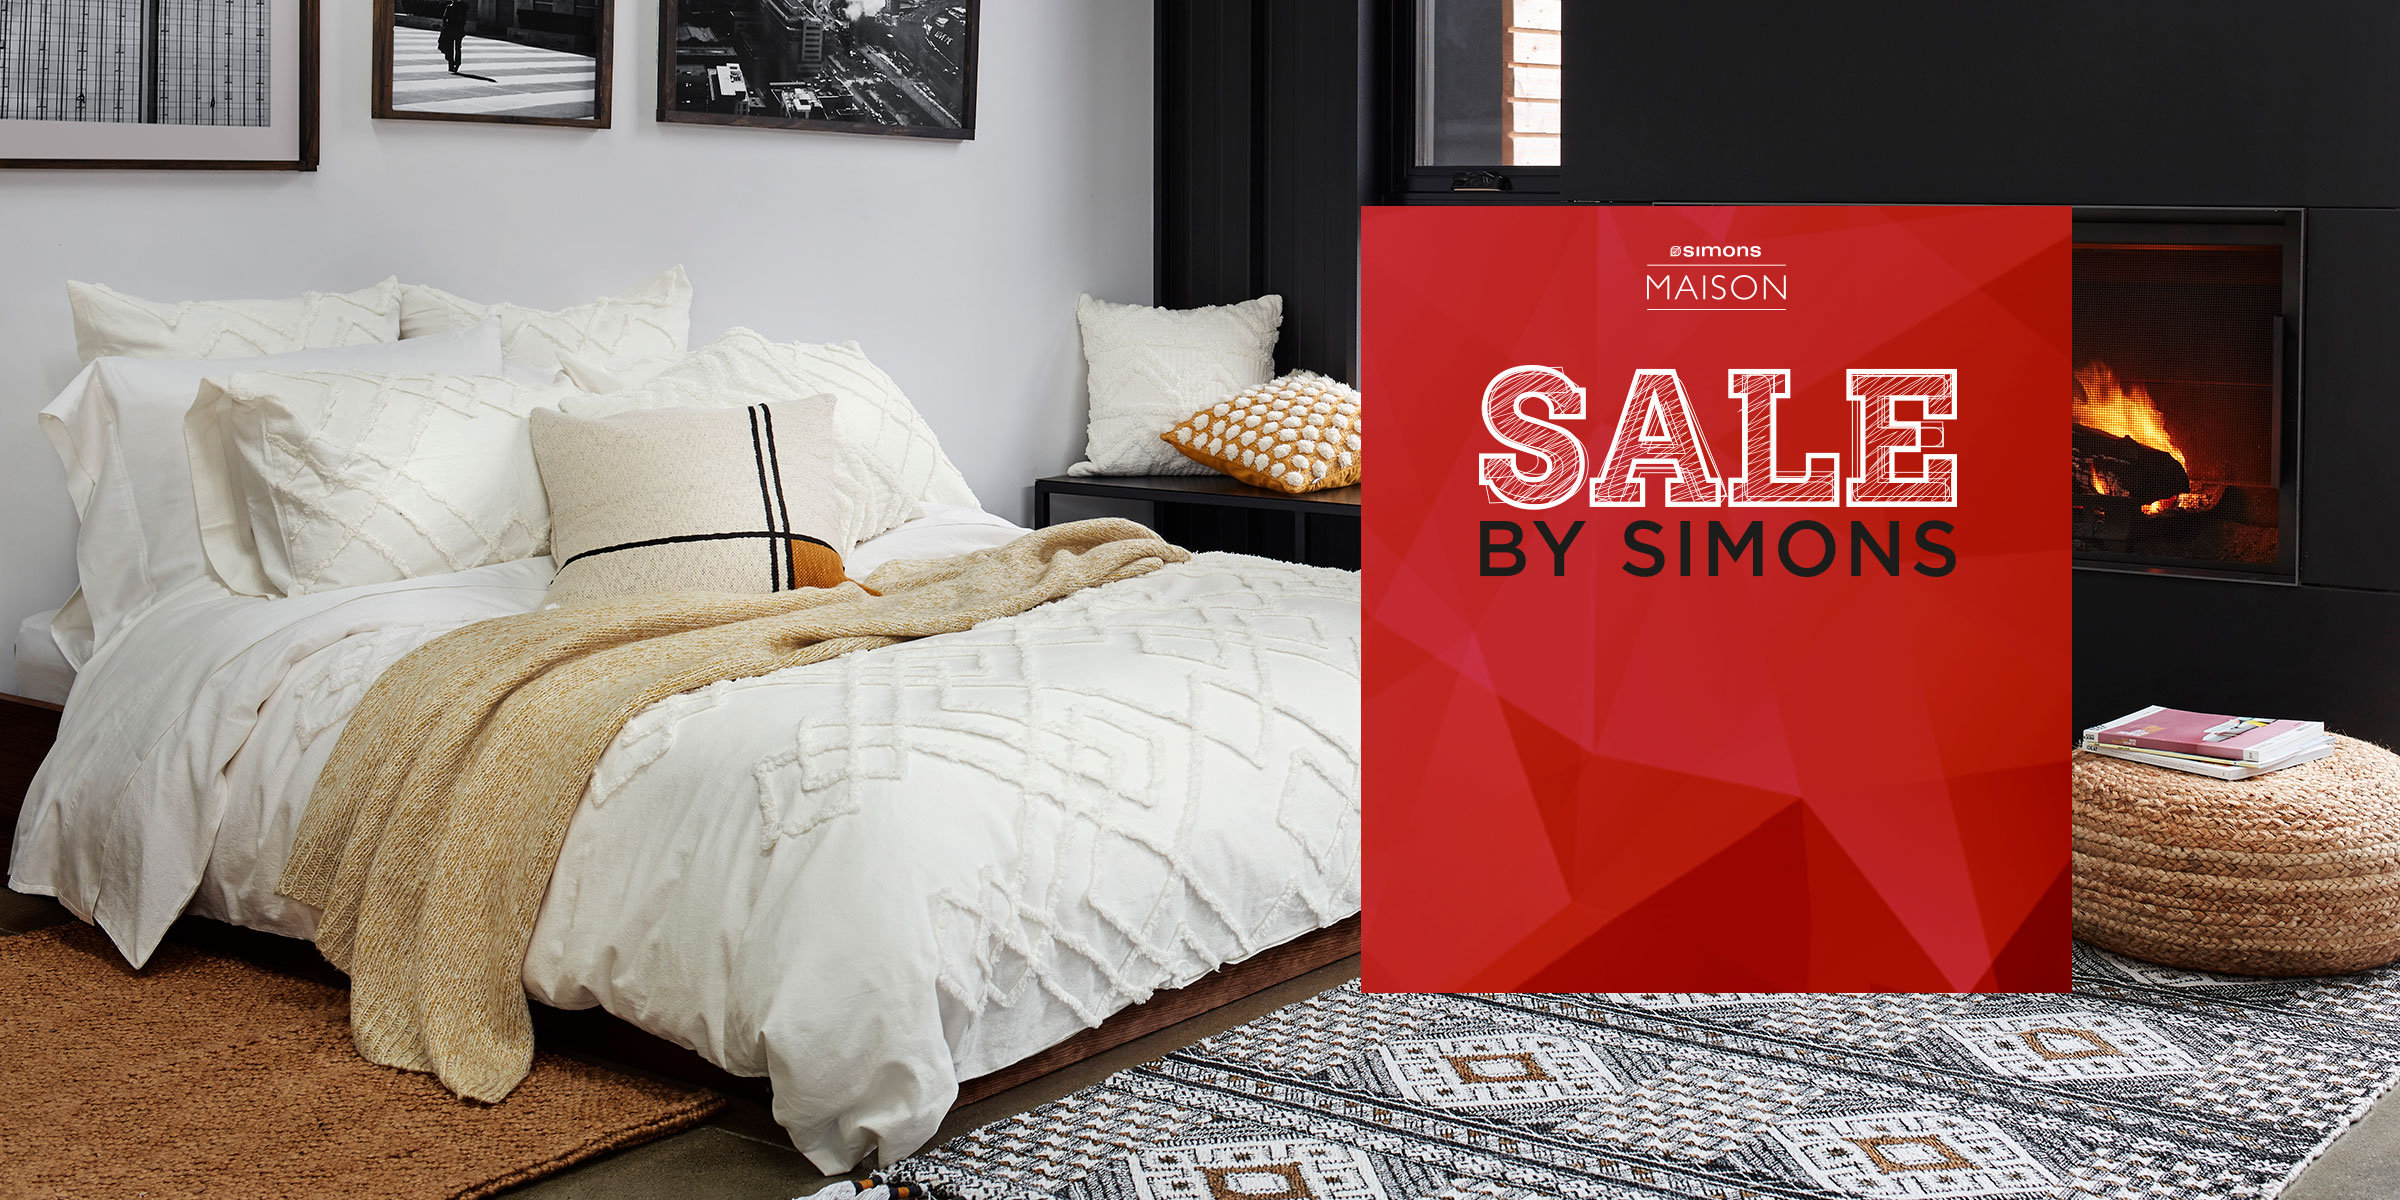 Accessories For The Home And Interior Decorating Simons